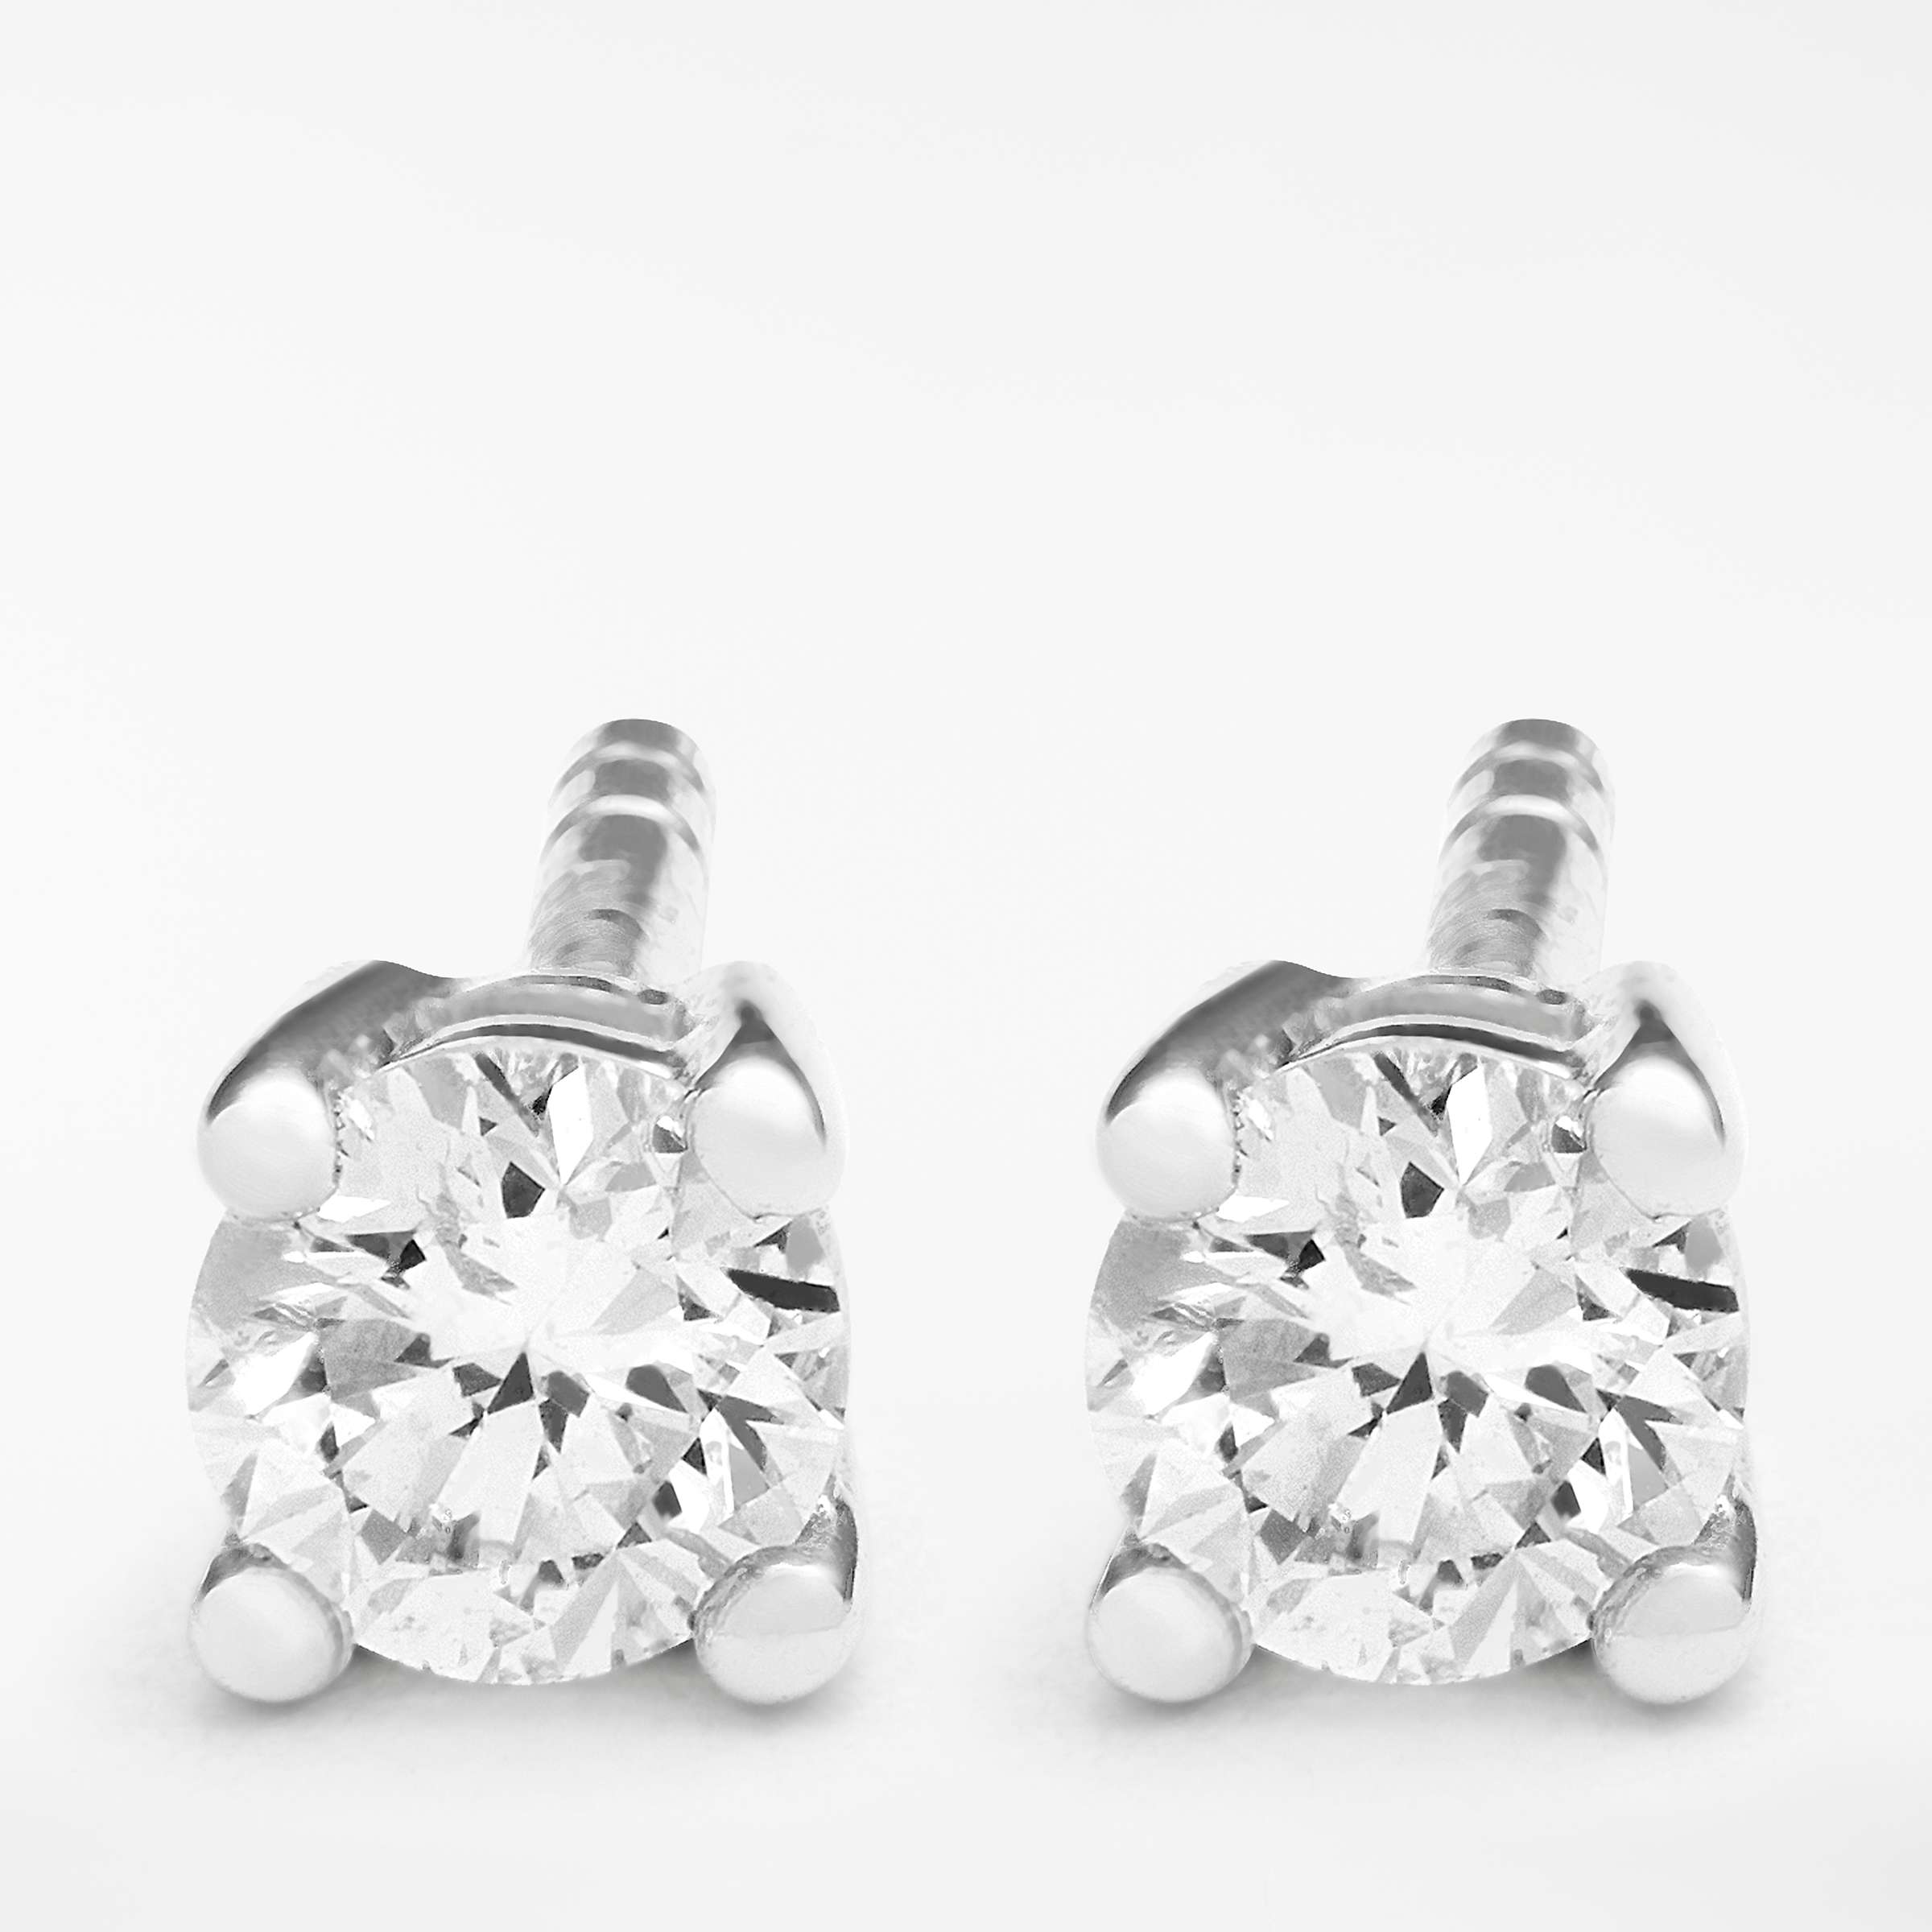 Buy Mogul 18ct White Gold Round Brilliant Solitaire Diamond Stud Earrings, 0.25ct Online at johnlewis.com